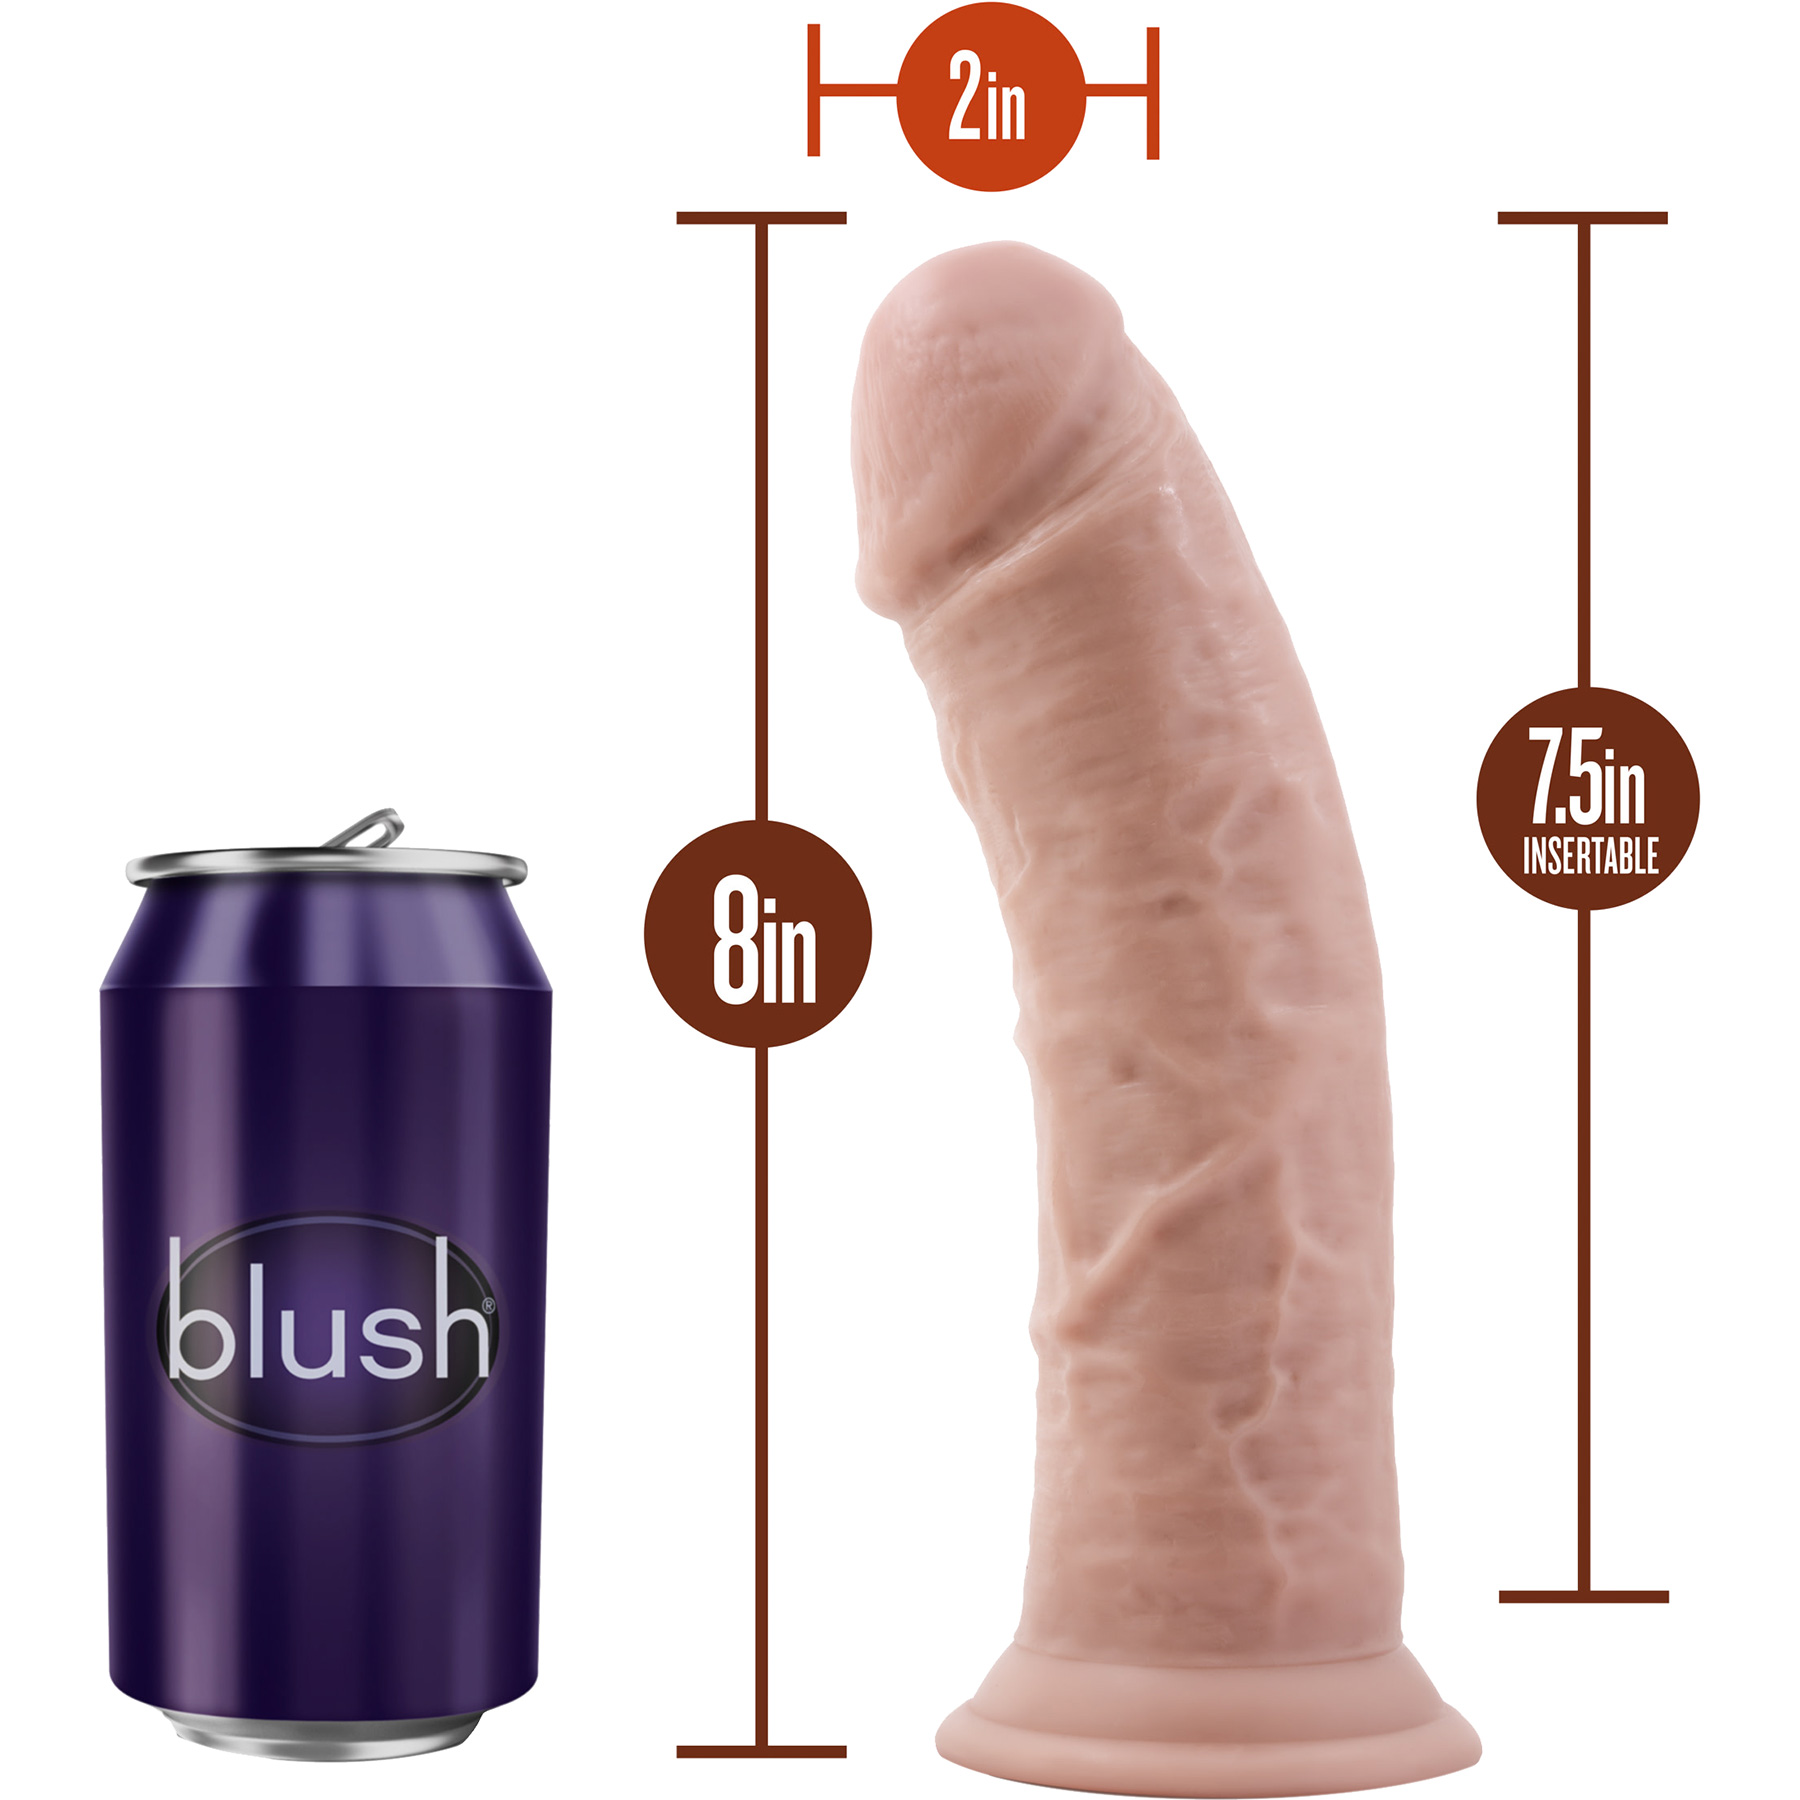 Dr. Skin 8 Inch Basic Realistic Dildo With Suction Cup by Blush - Measurements